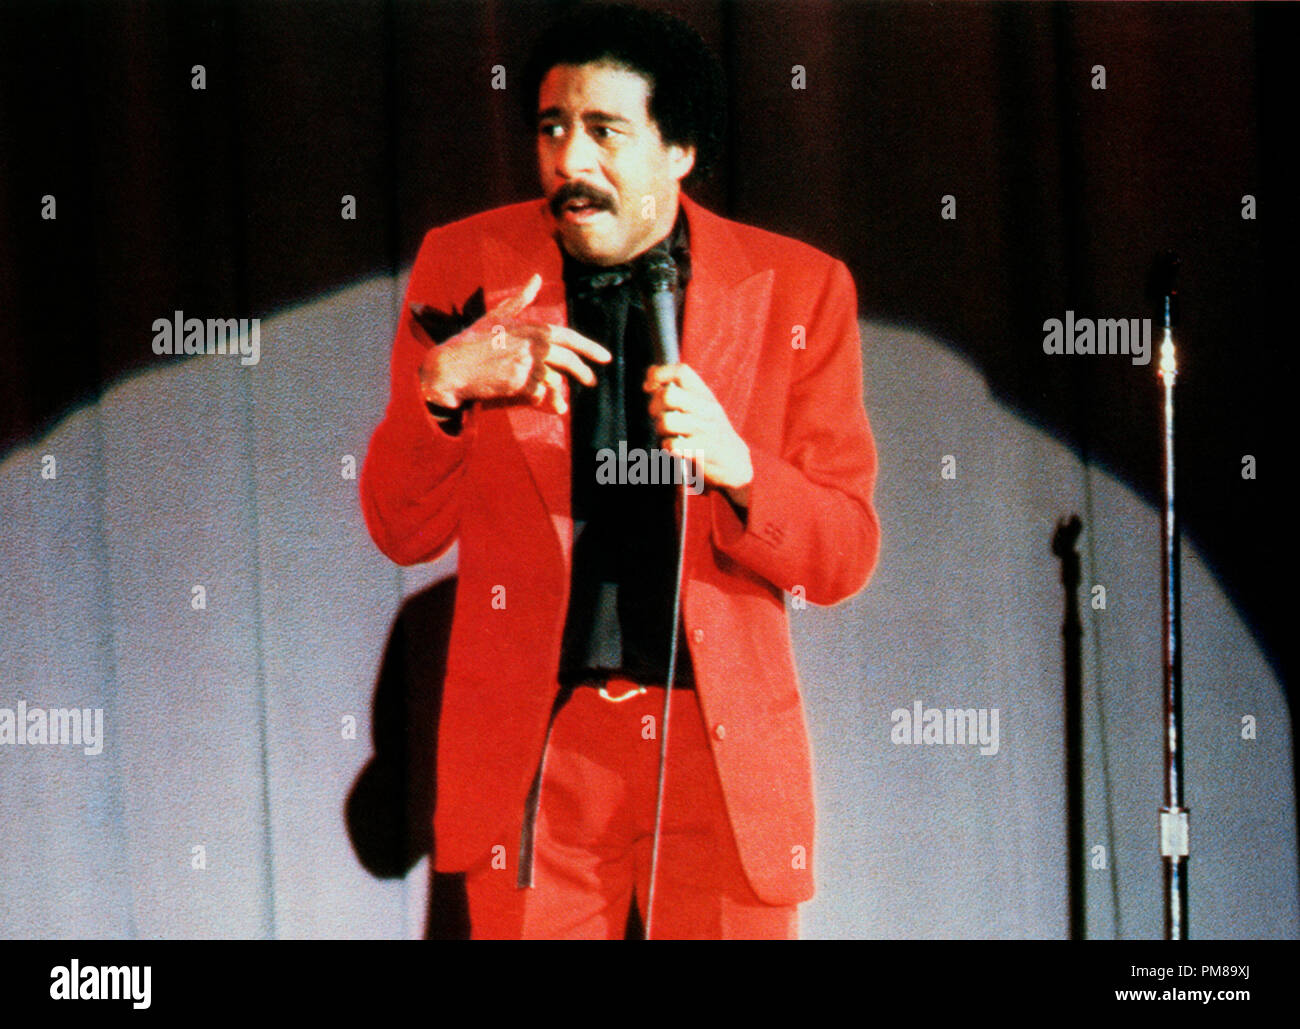 Studio Publicity Still from 'Richard Pryor Live on the Sunset Strip' Richard Pryor © 1982 Columbia Pictures All Rights Reserved   File Reference # 31710125THA  For Editorial Use Only Stock Photo